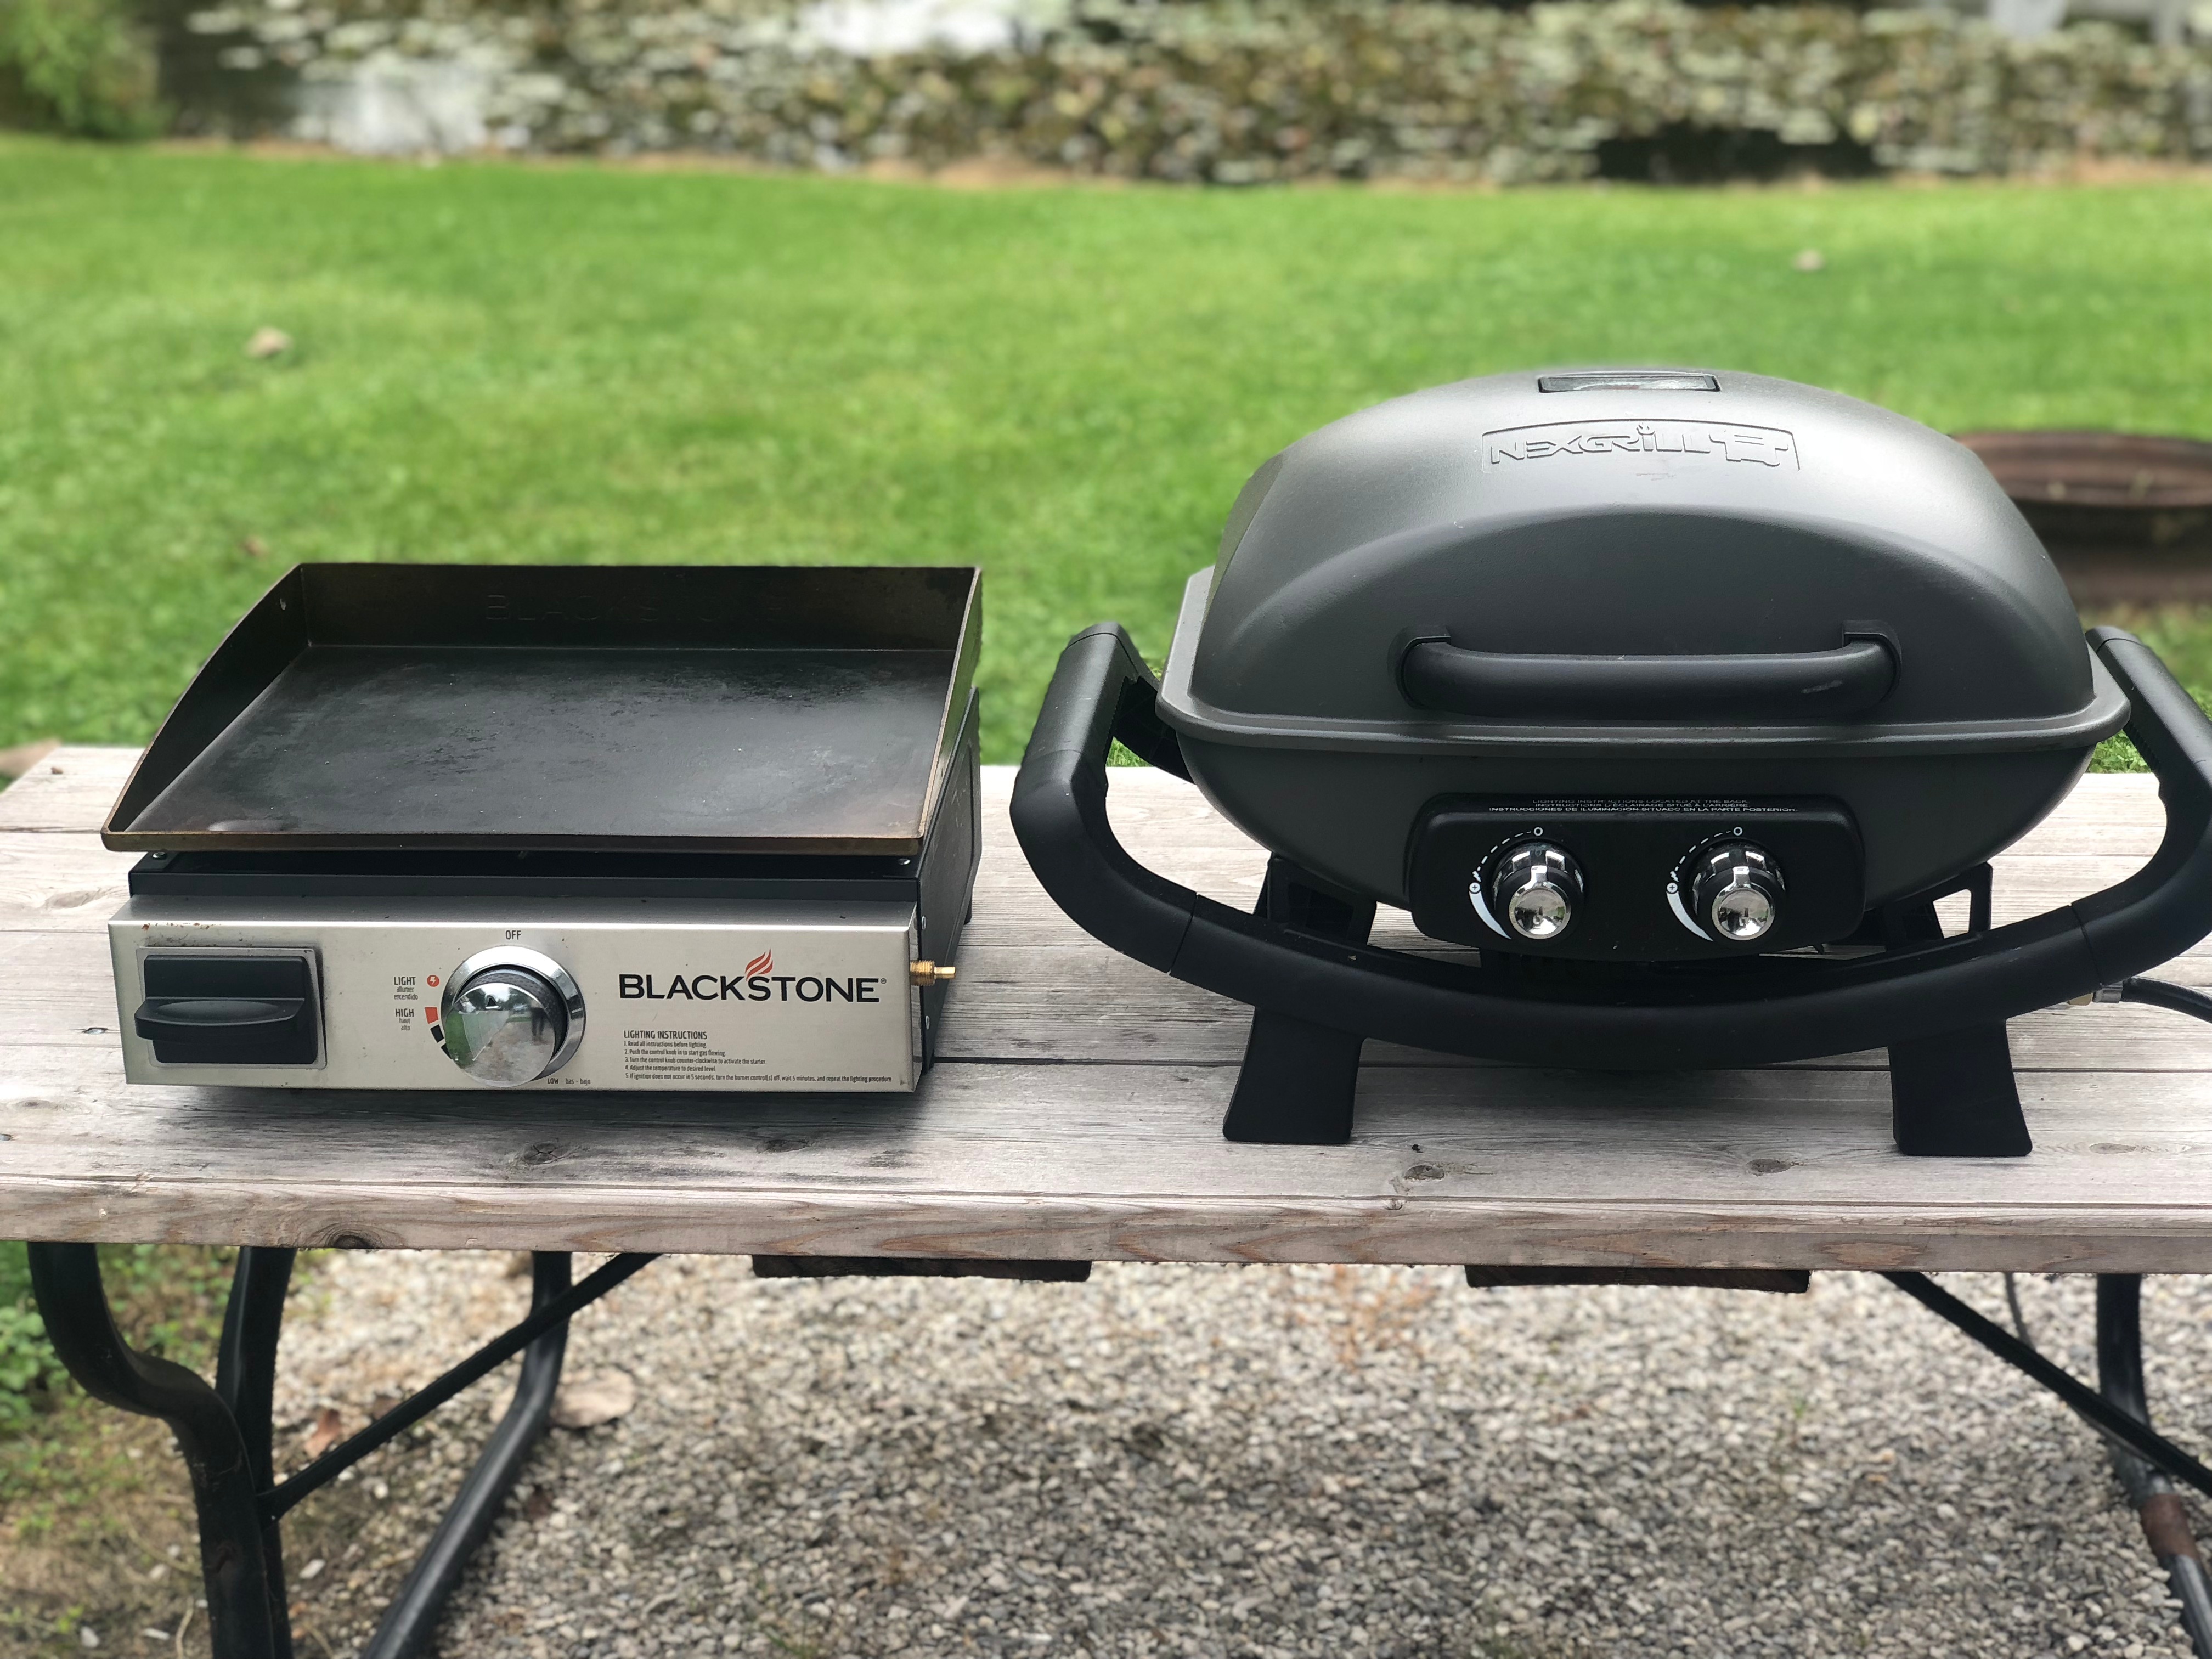 Use propane grills and griddles for versatile outdoor cooking options